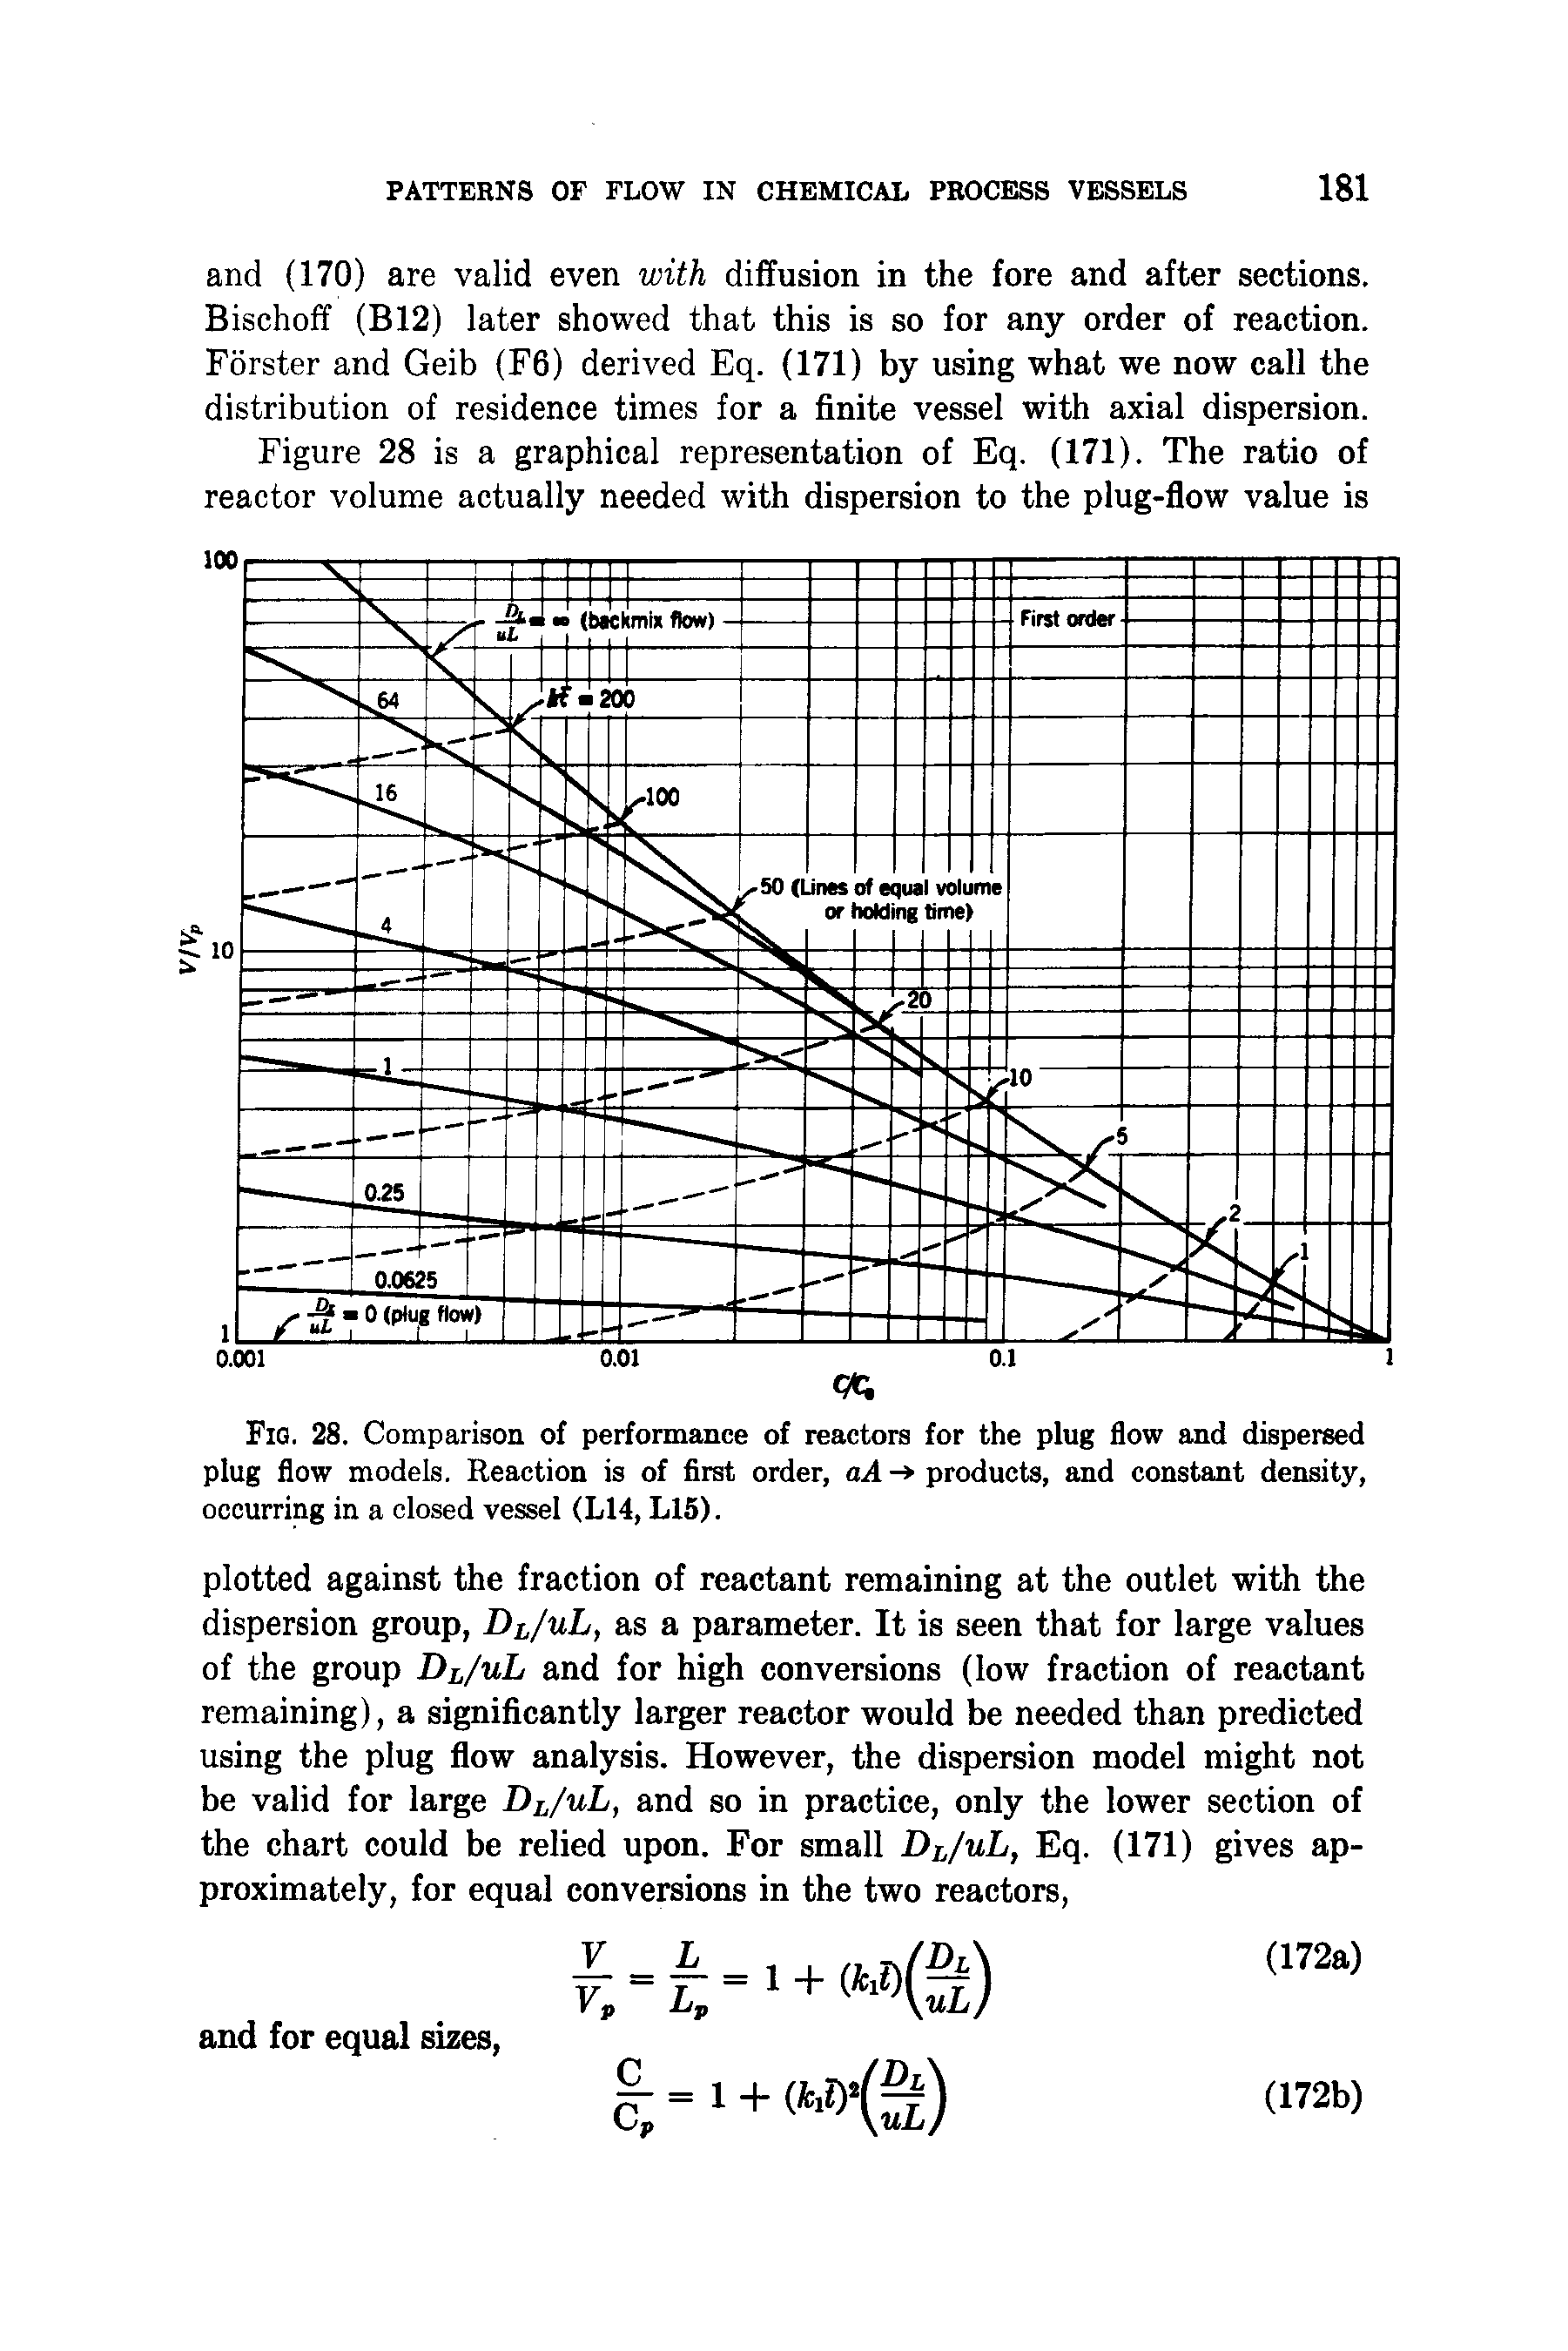 Fig. 28. Comparison of performance of reactors for the plug flow and dispersed plug flow models. Reaction is of first order, aA- products, and constant density, occurring in a closed vessel (L14, L15).